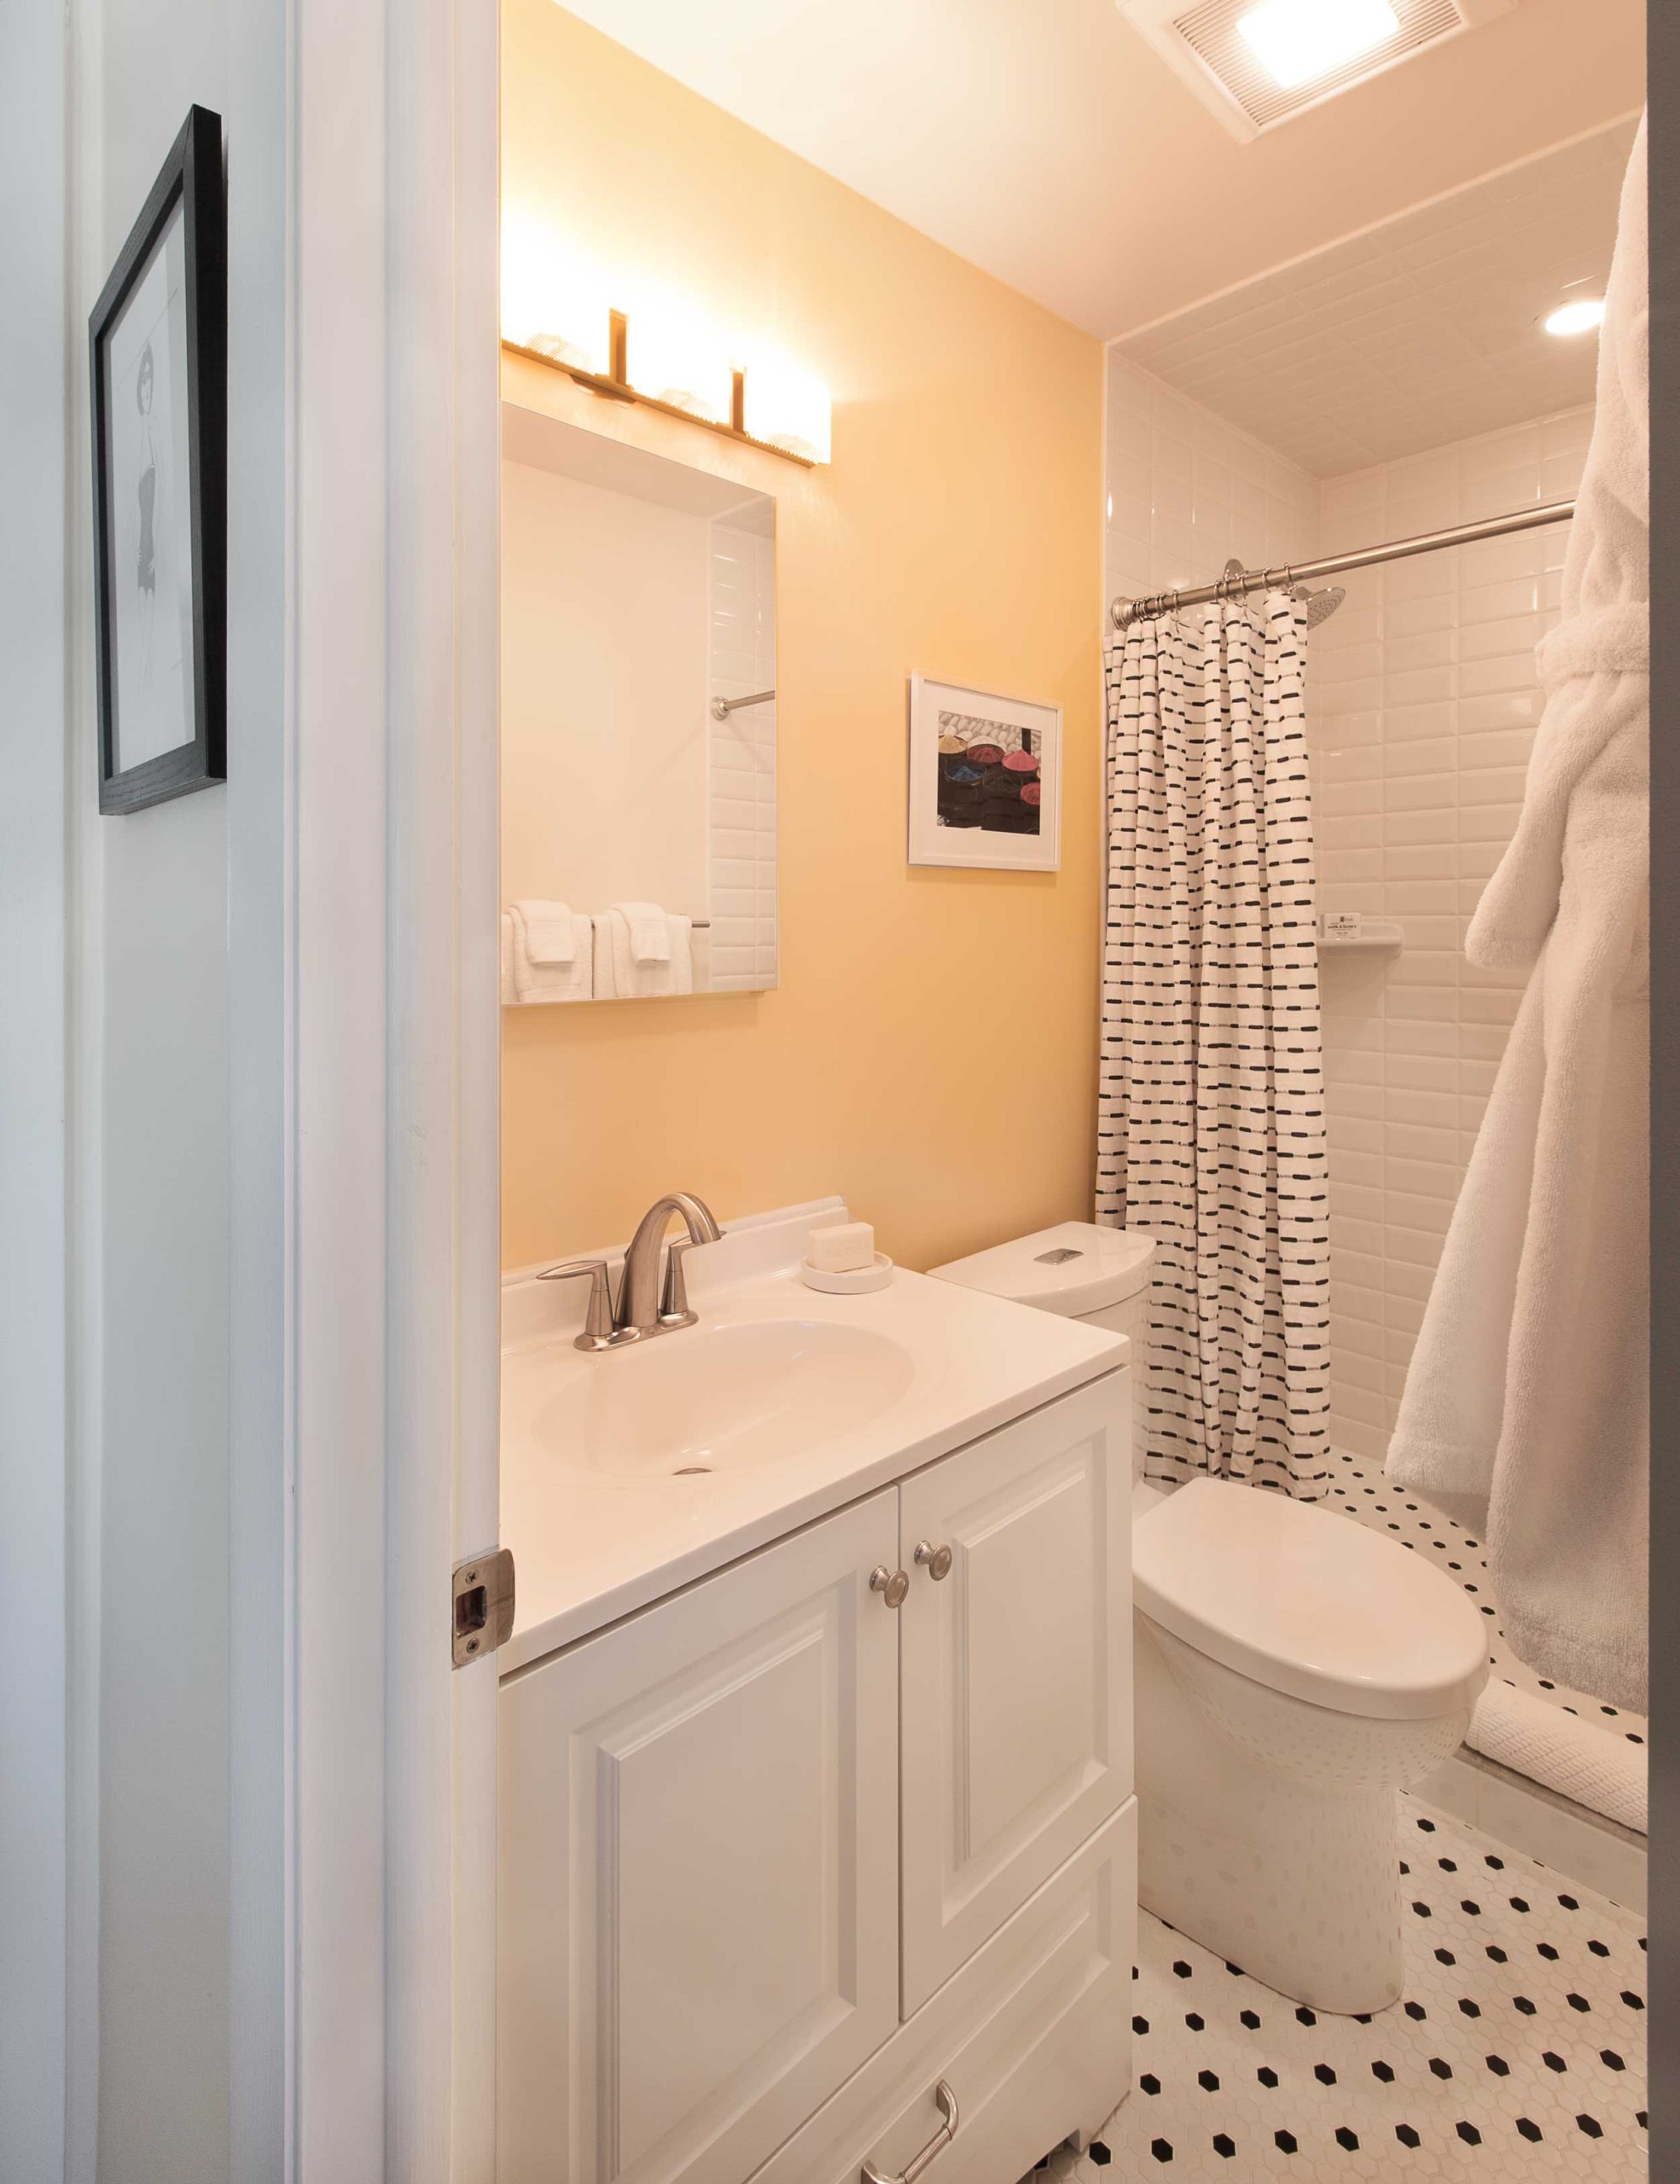 A well stocked black and white bathroom offers organic bath products and organic towels.